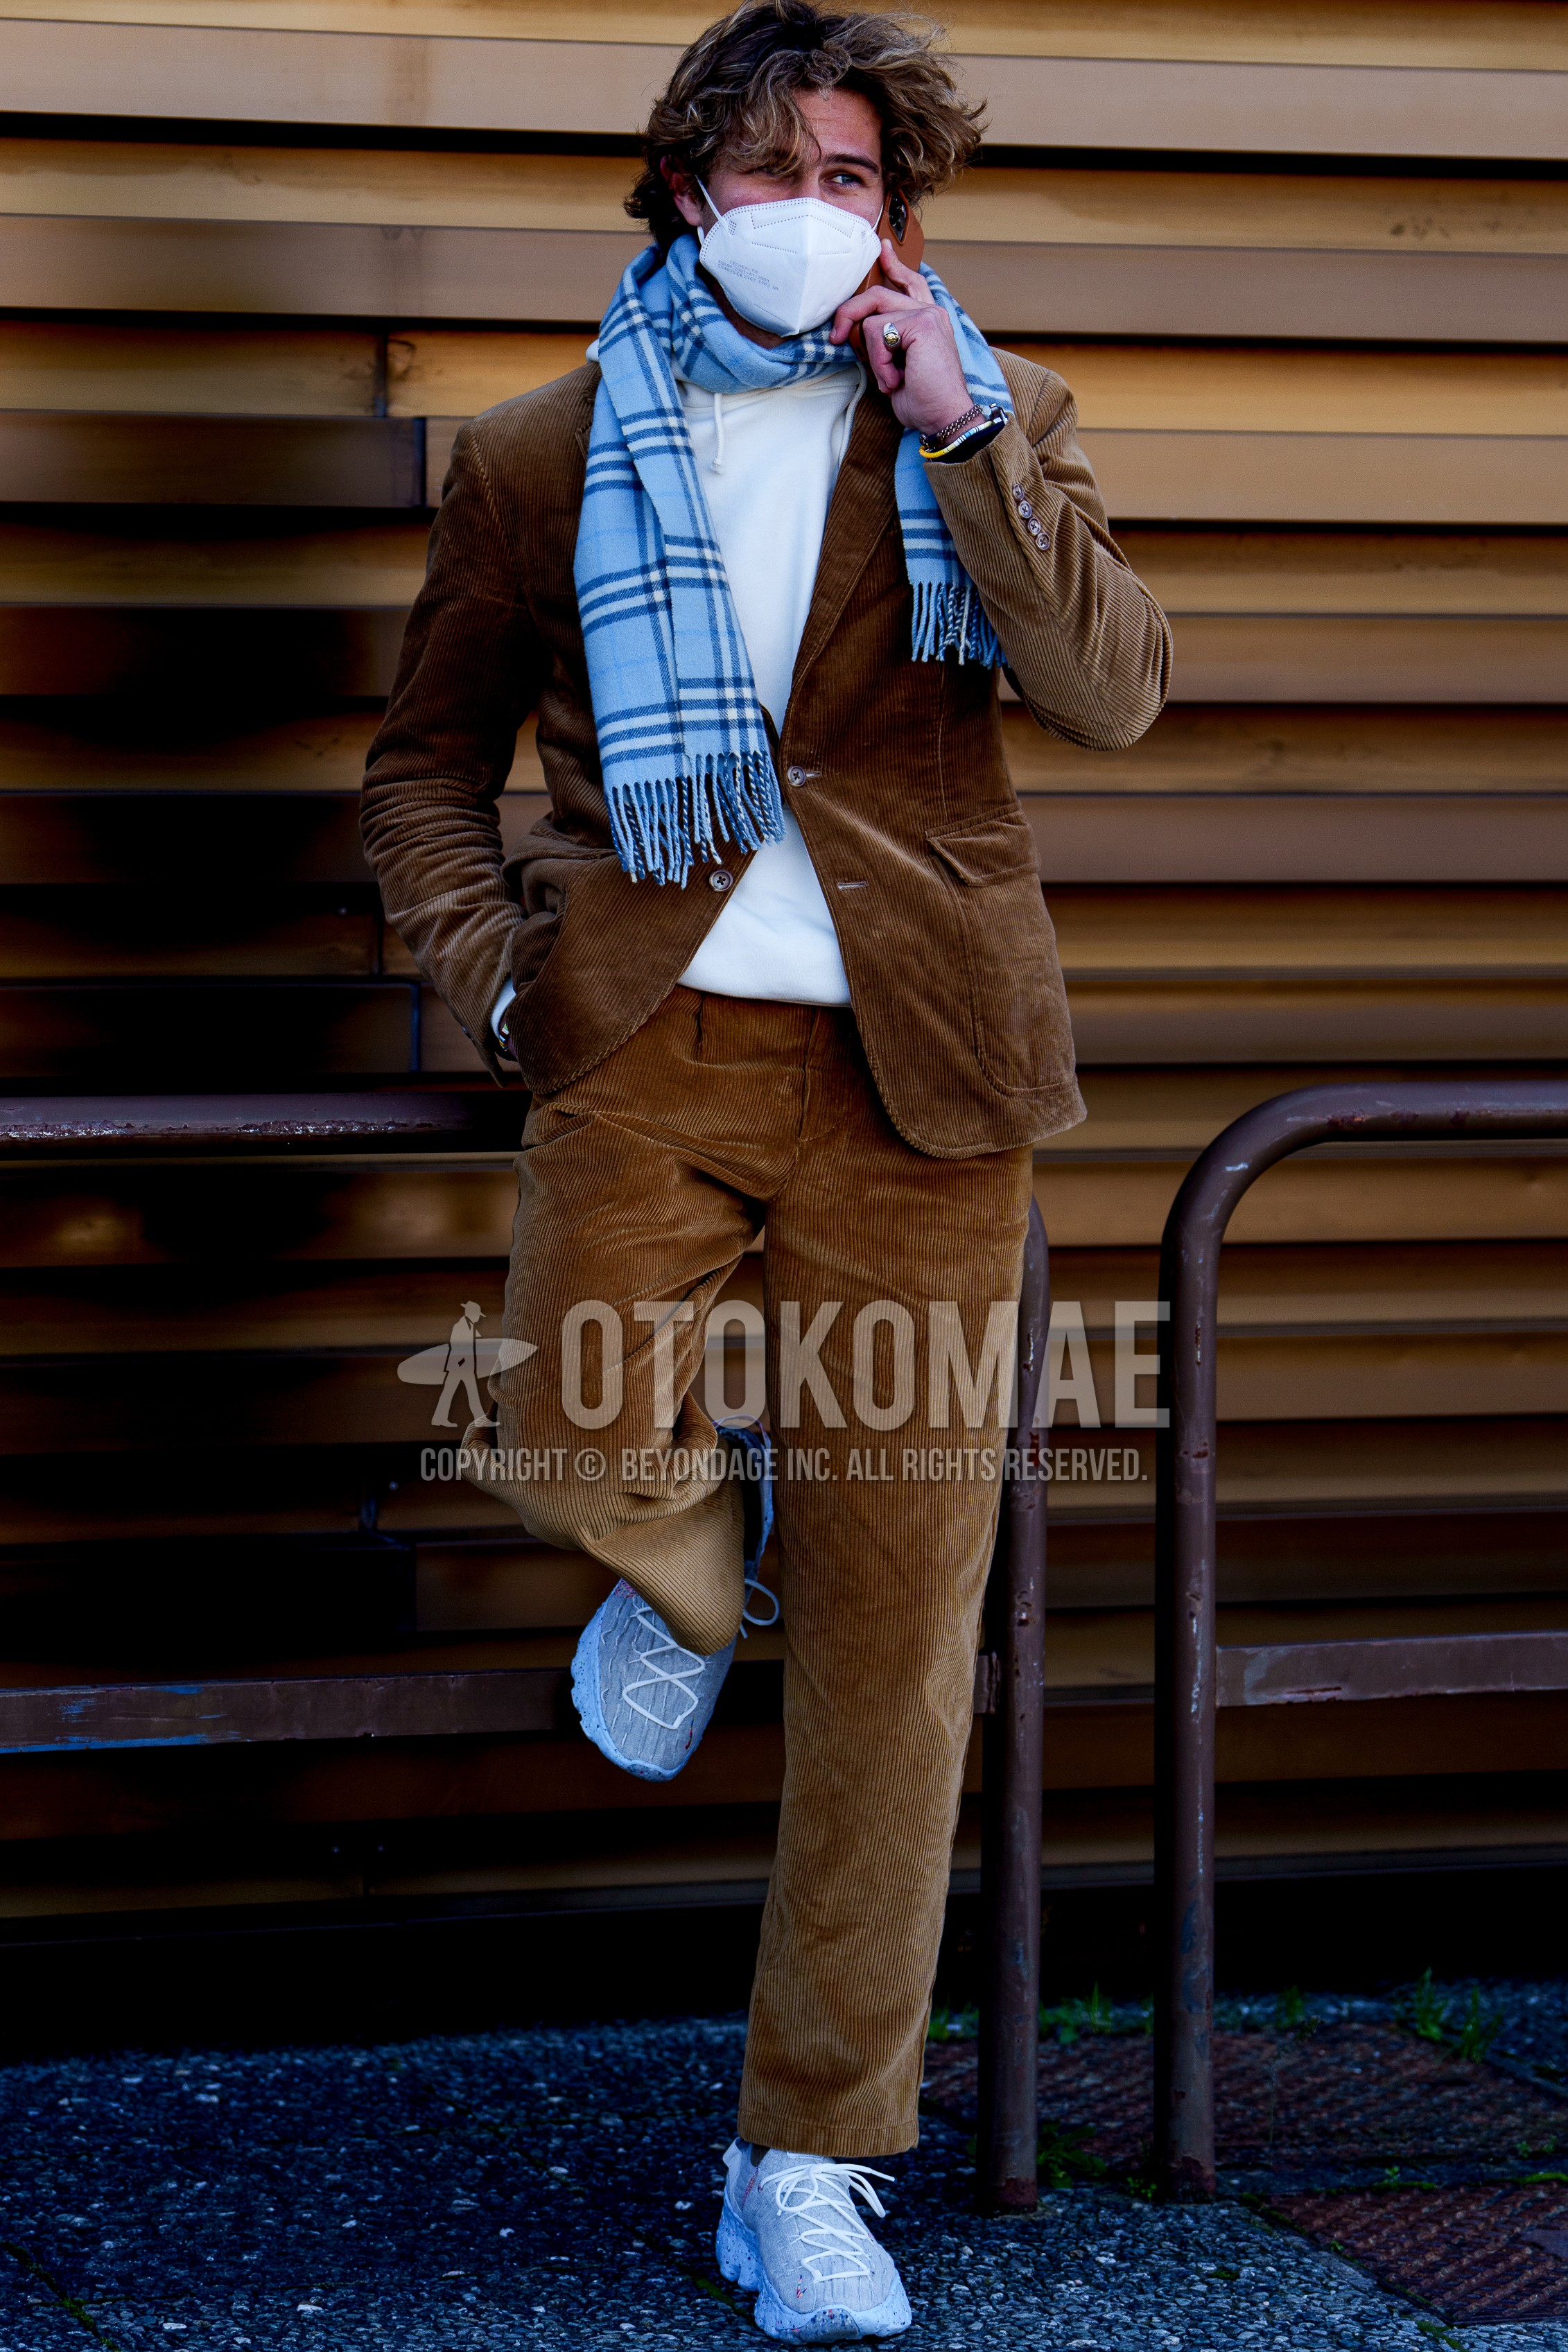 Men's autumn winter outfit with blue check scarf, brown plain tailored jacket, white plain hoodie, brown plain winter pants (corduroy,velour), white sneakers.